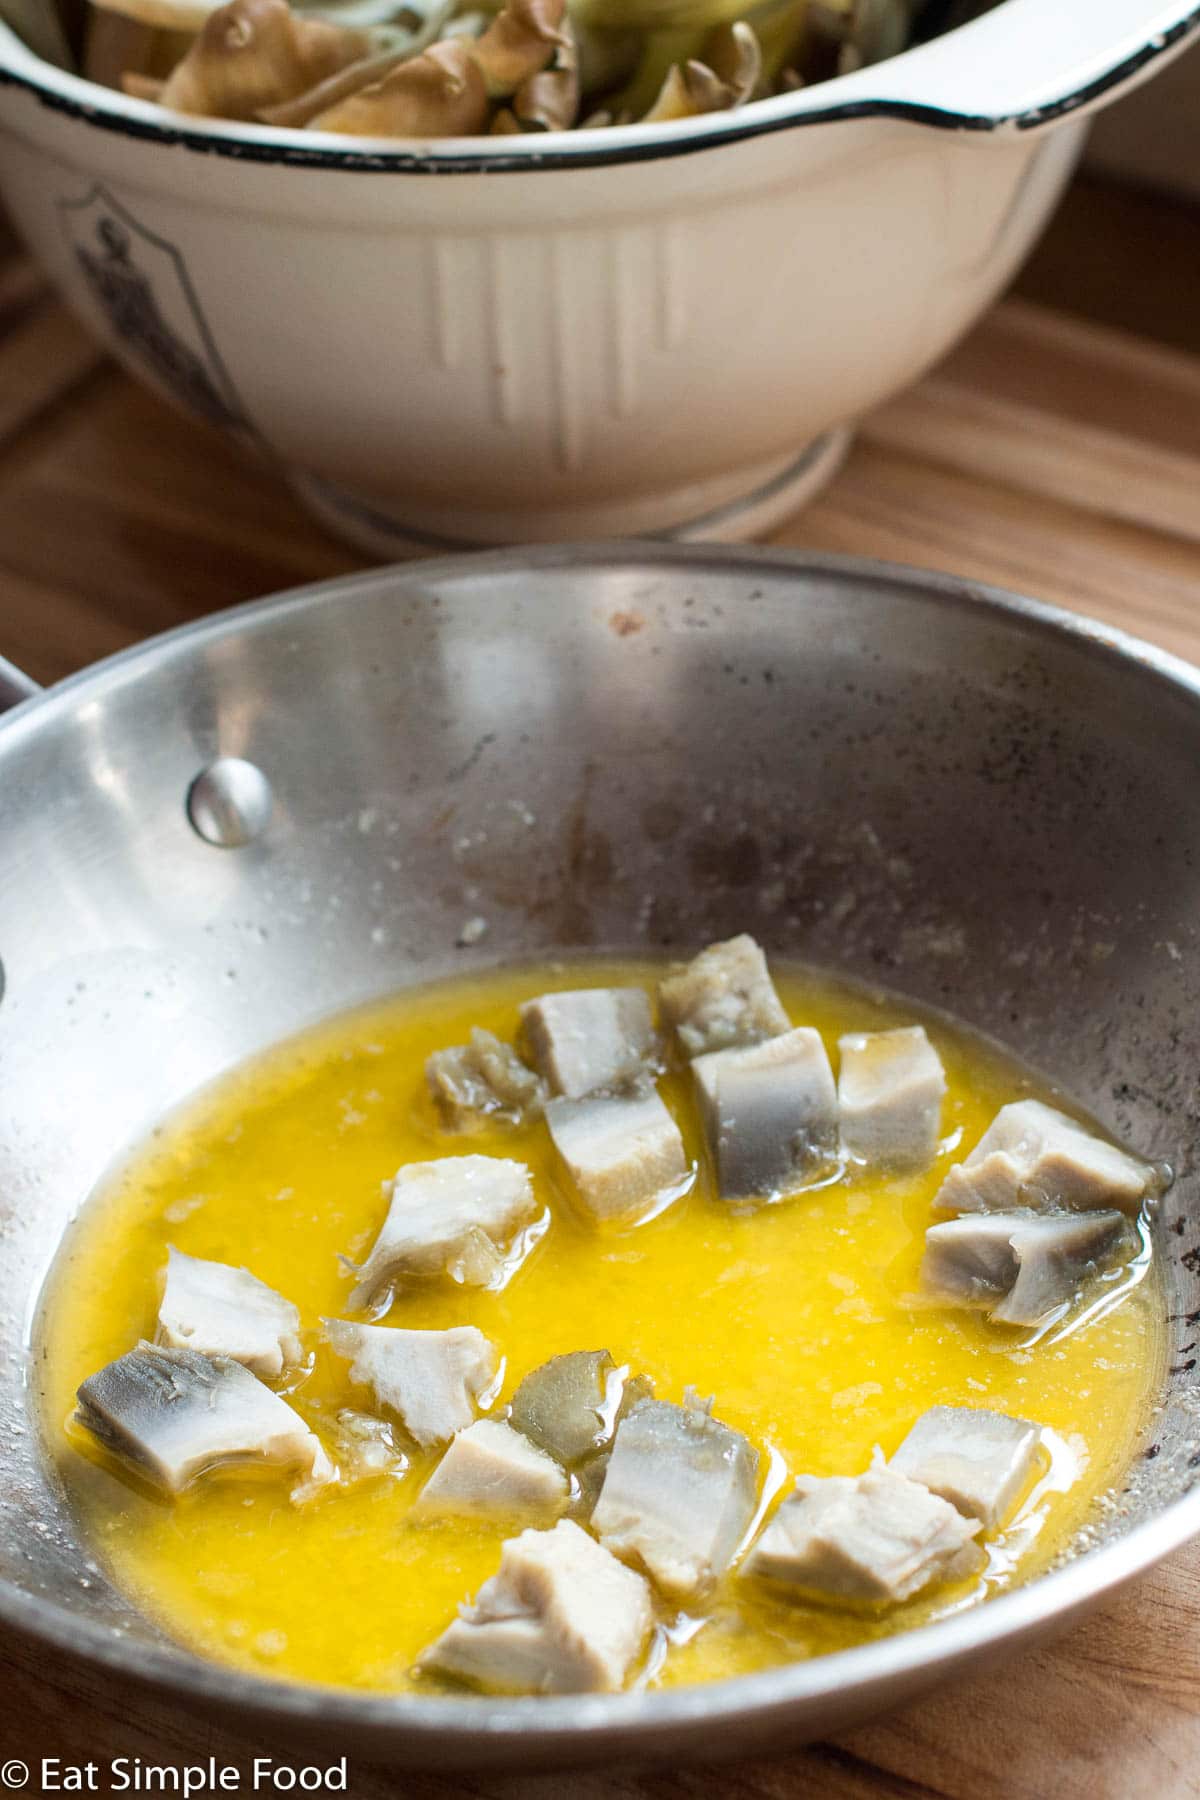 Cooked diced artichoke hearts in a stainless steel pan full of bright yellow butter.